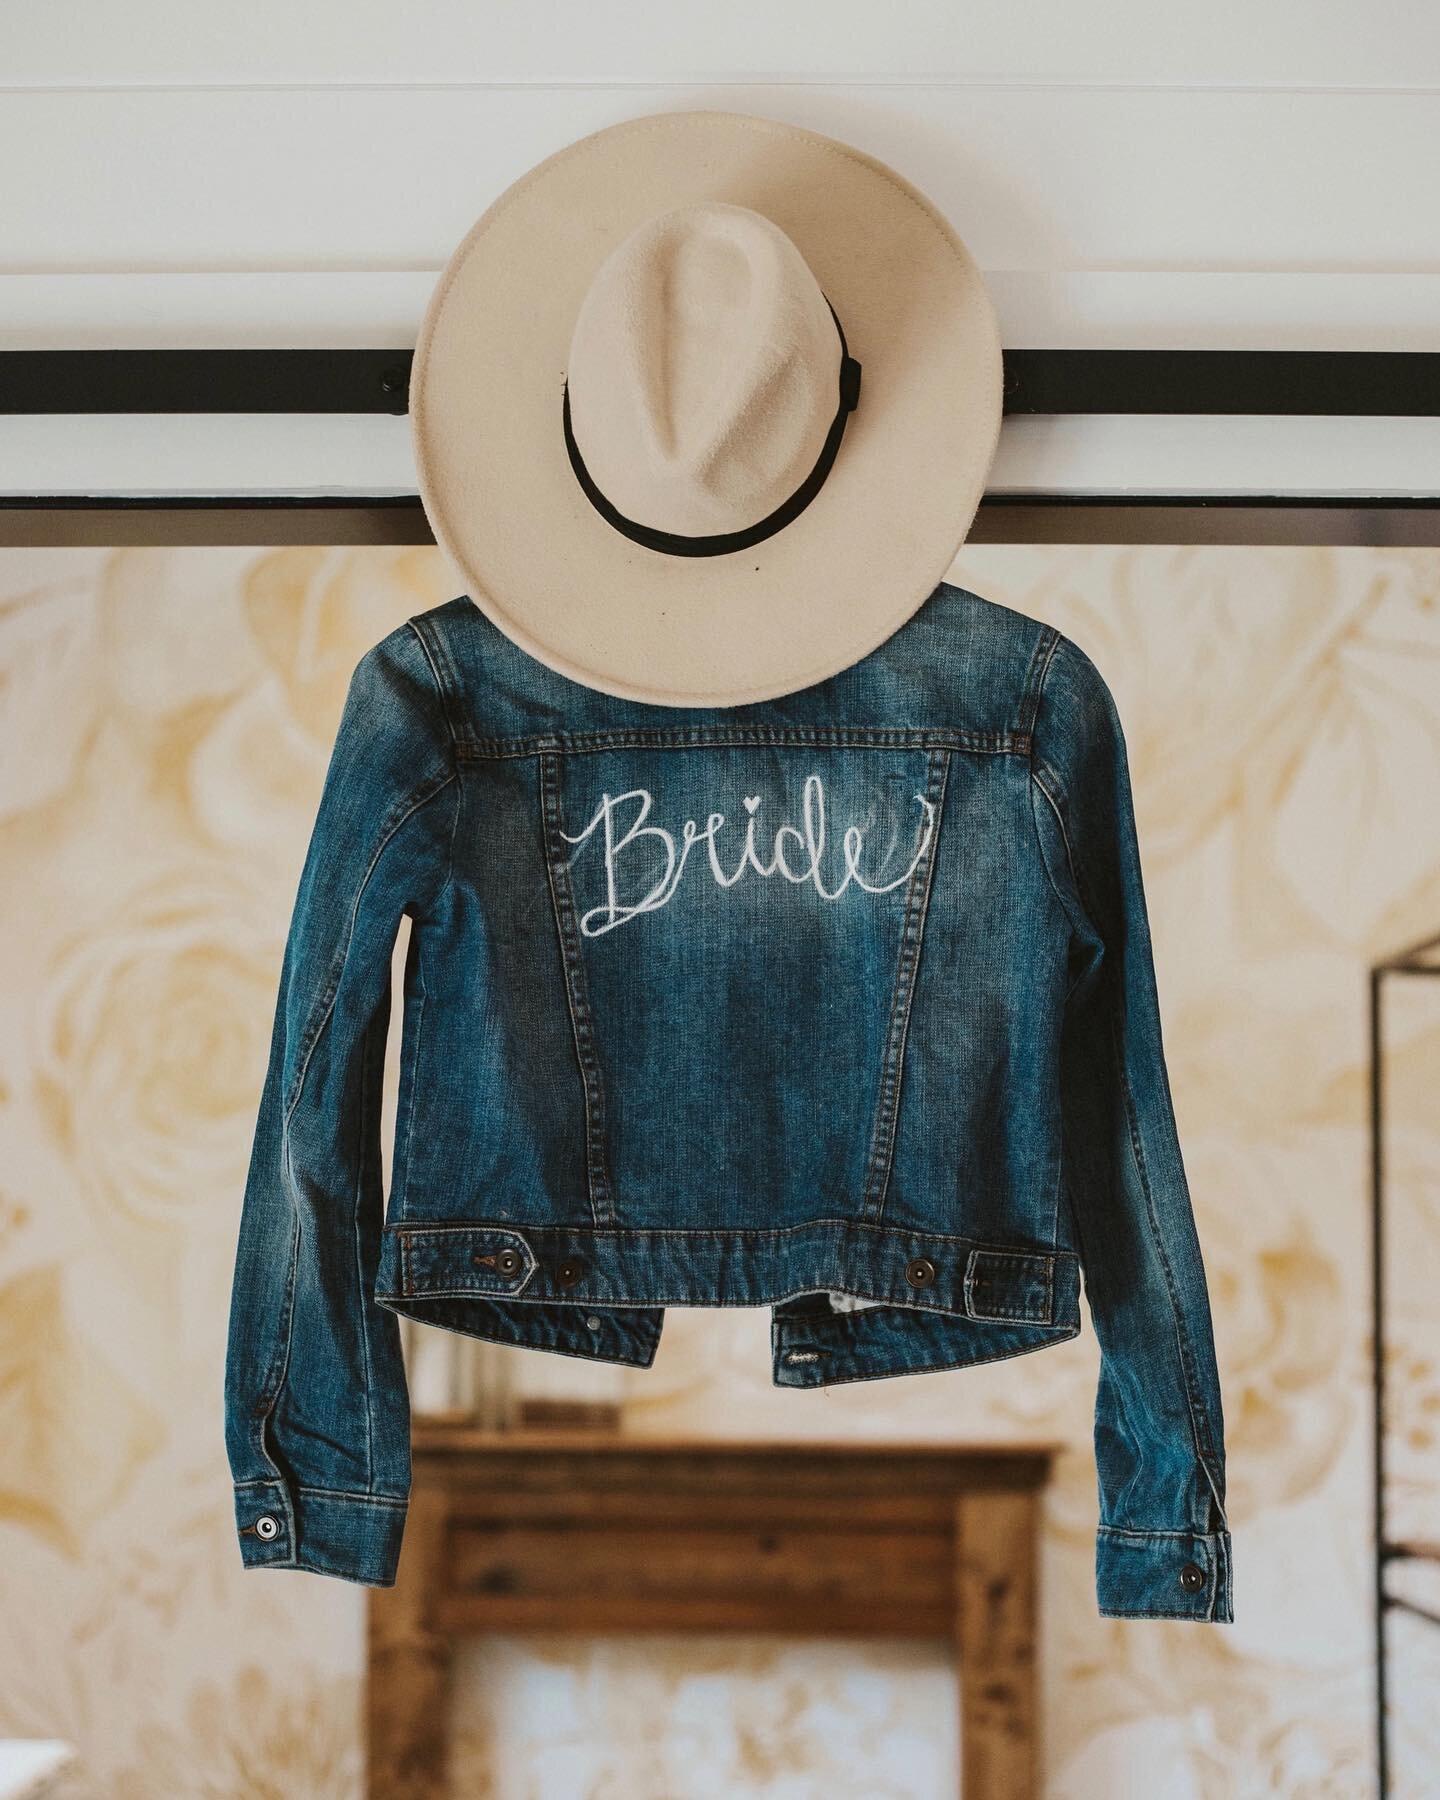 I am loving this trend of painted bridal jackets for your special day 😍💍
-
-
-
-
Host: @shelbyhortonphotography
Venue: @thewildsvenue
D&eacute;cor: @violetvintagerentals and @sparkling_decor_and_more